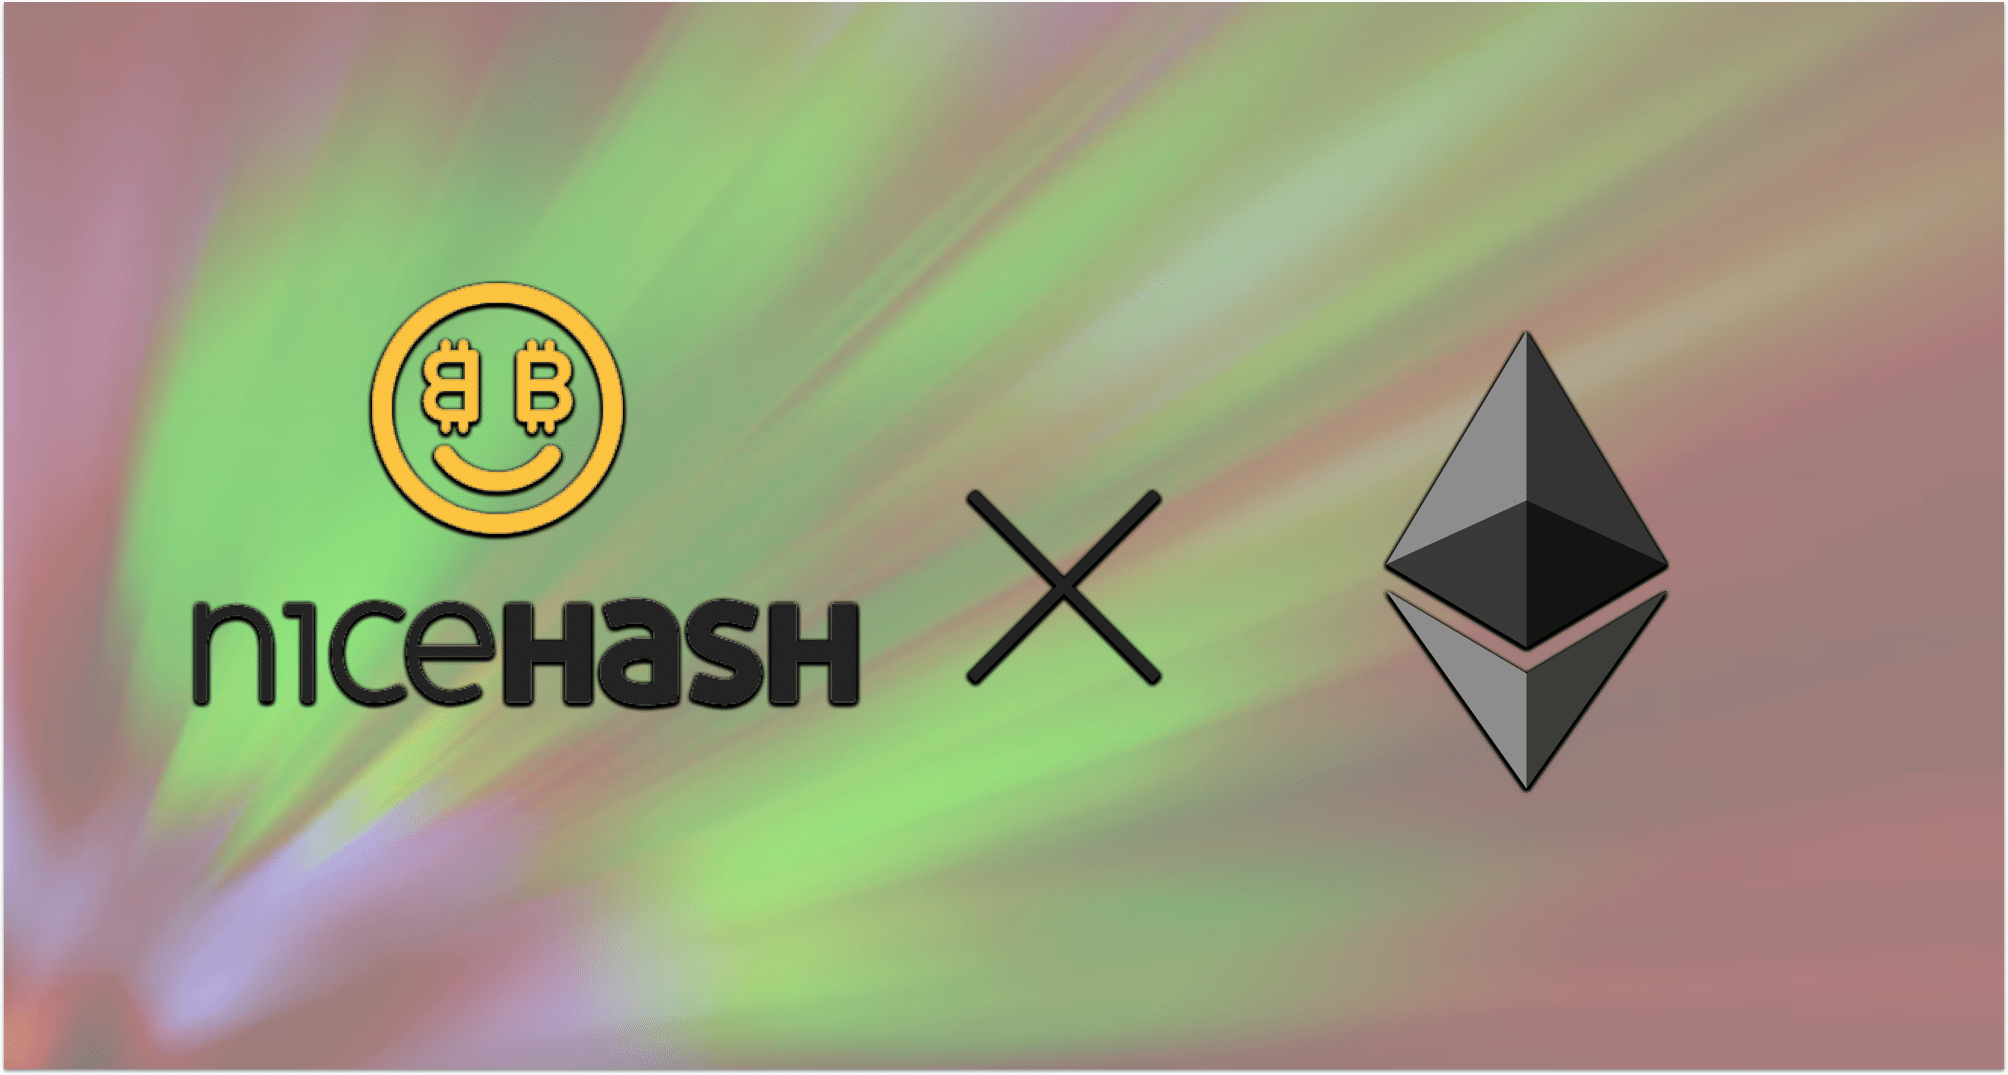 Nicehash for ethereum new ico crypto